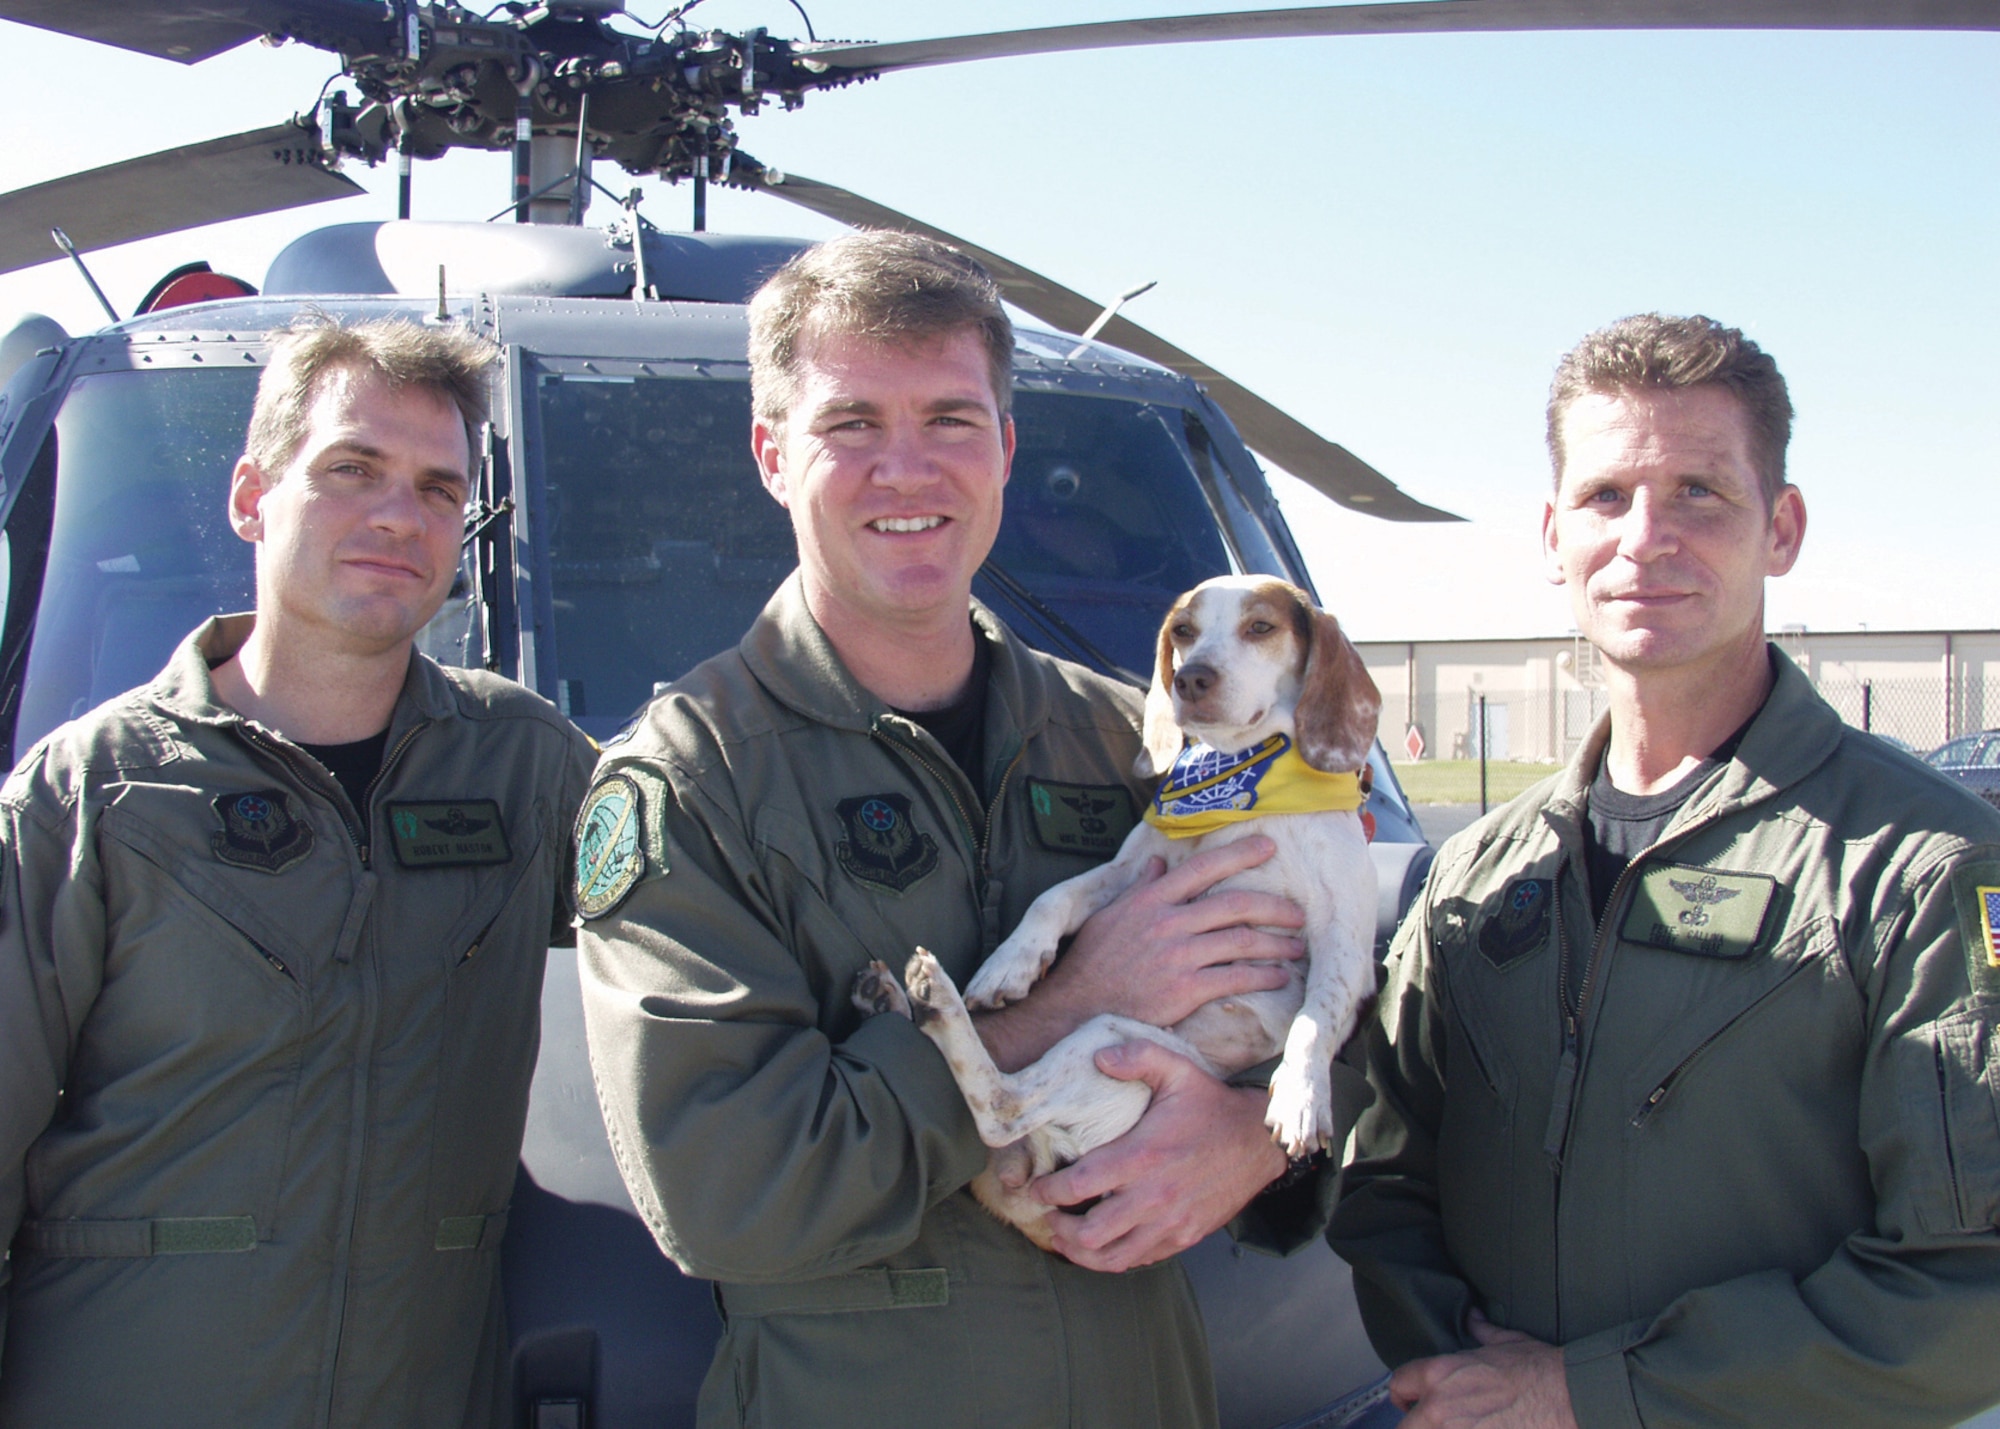 PATRICK AIR FORCE BASE, Fla.- 920th Rescue Wing members Maj. Robert Haston (left), Capt. Michael Brasher (center), and Senior Master Sgt. Pete Callina (right) pose with the brave beagle that aided their rescue efforts in New Orleans during Hurricane Katrina operations. Renamed "Katrina", the canine was reunited with the crew after Captain Brasher and his wife conducted their own search and rescue mission. (U.S. Air Force photo by Senior Airman Heather L. Kelly)